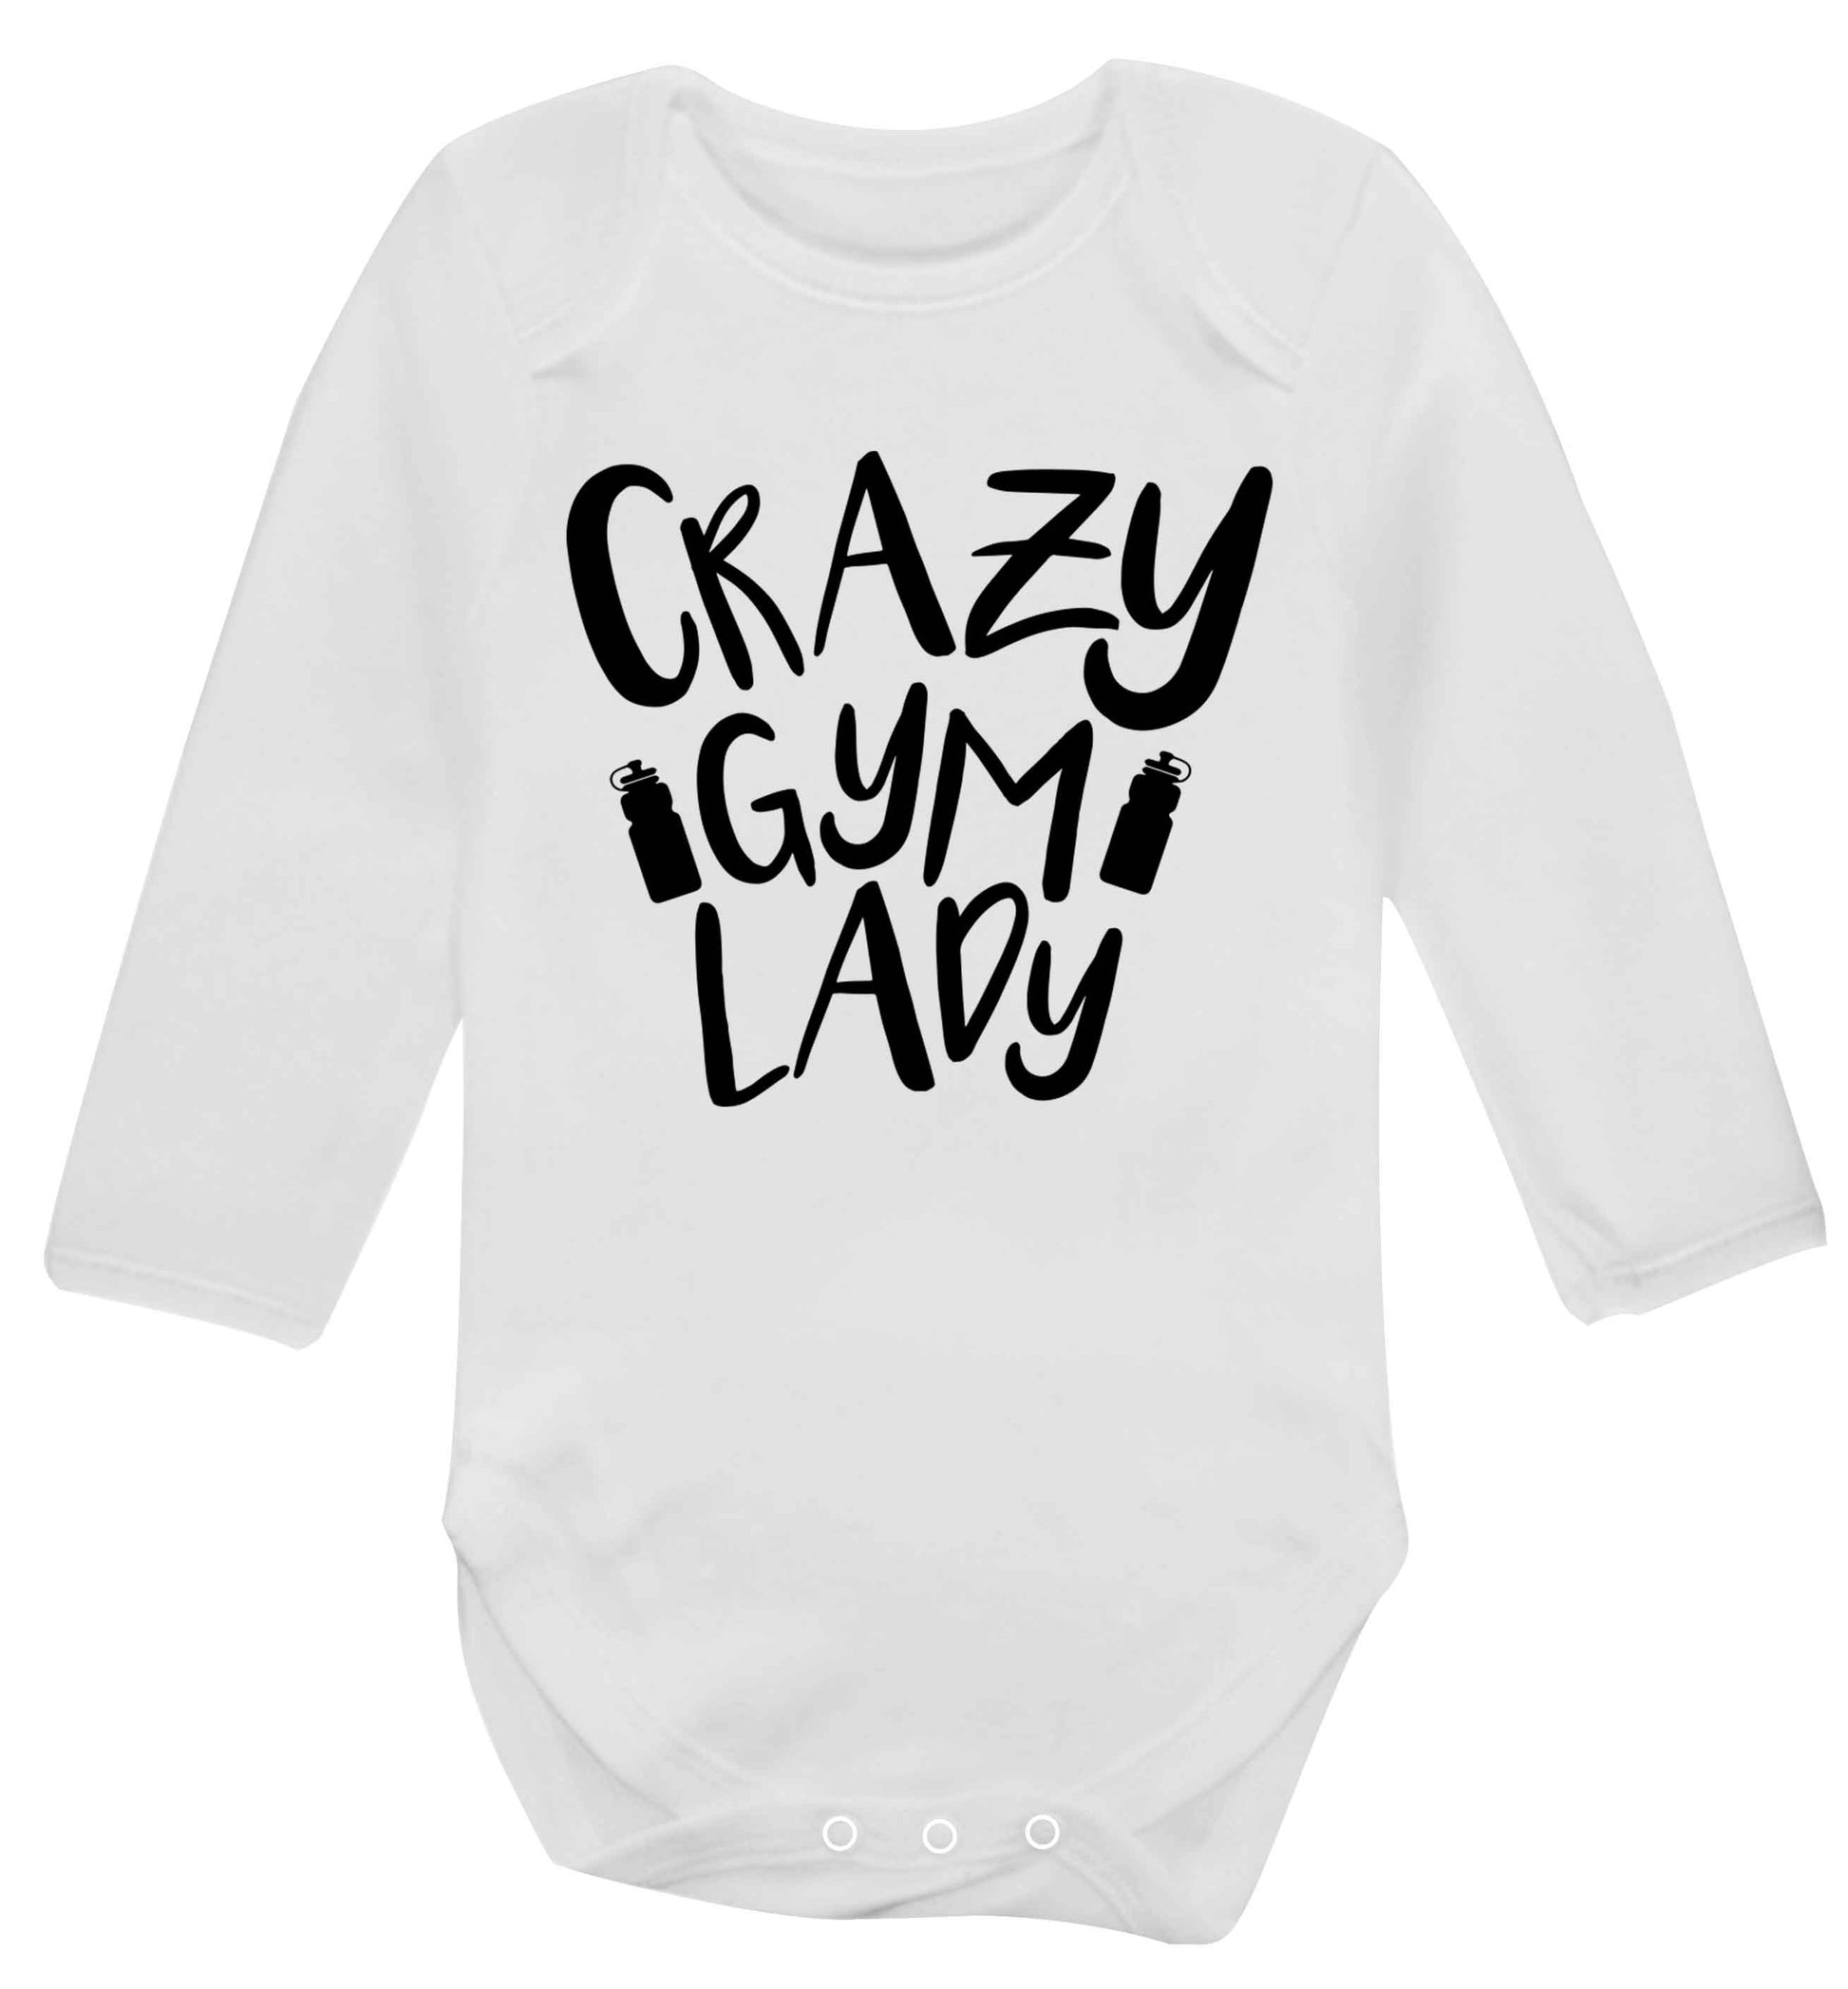 Crazy gym lady Baby Vest long sleeved white 6-12 months